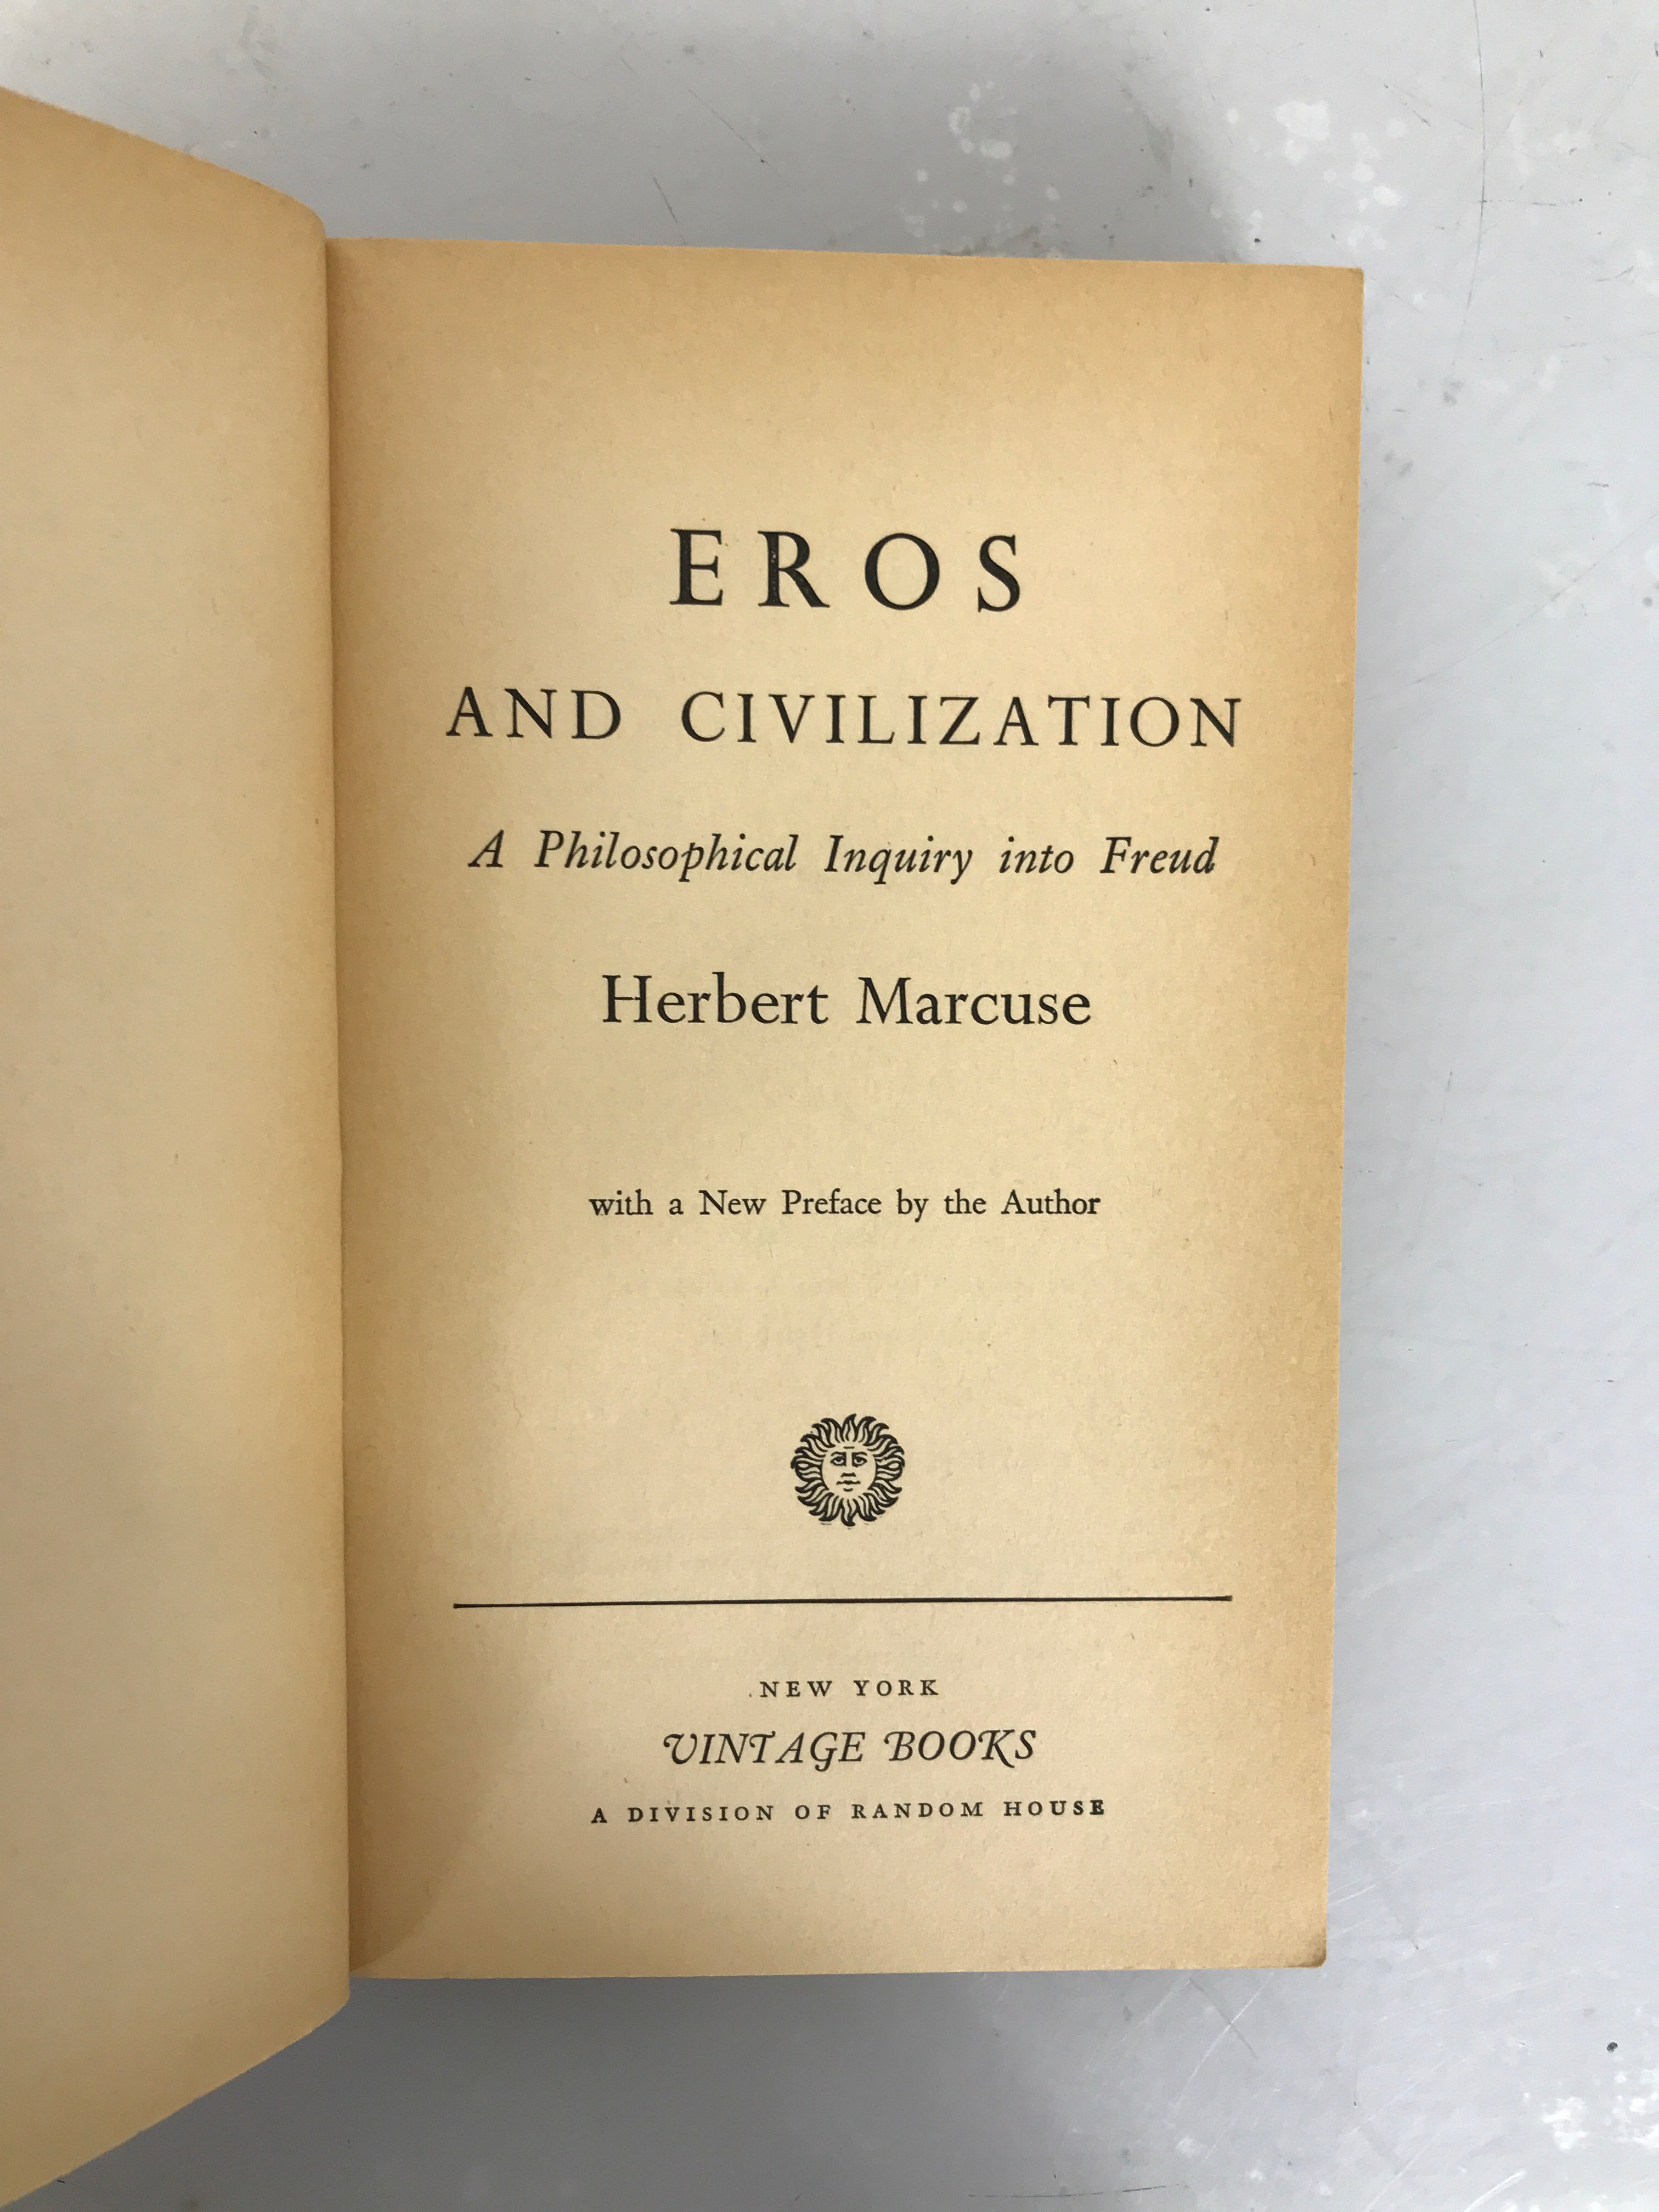 Lot of 2 Psychology Paperbacks: Eros and Civilization and The Presentation of Self in Everyday Life  (1955-1959)